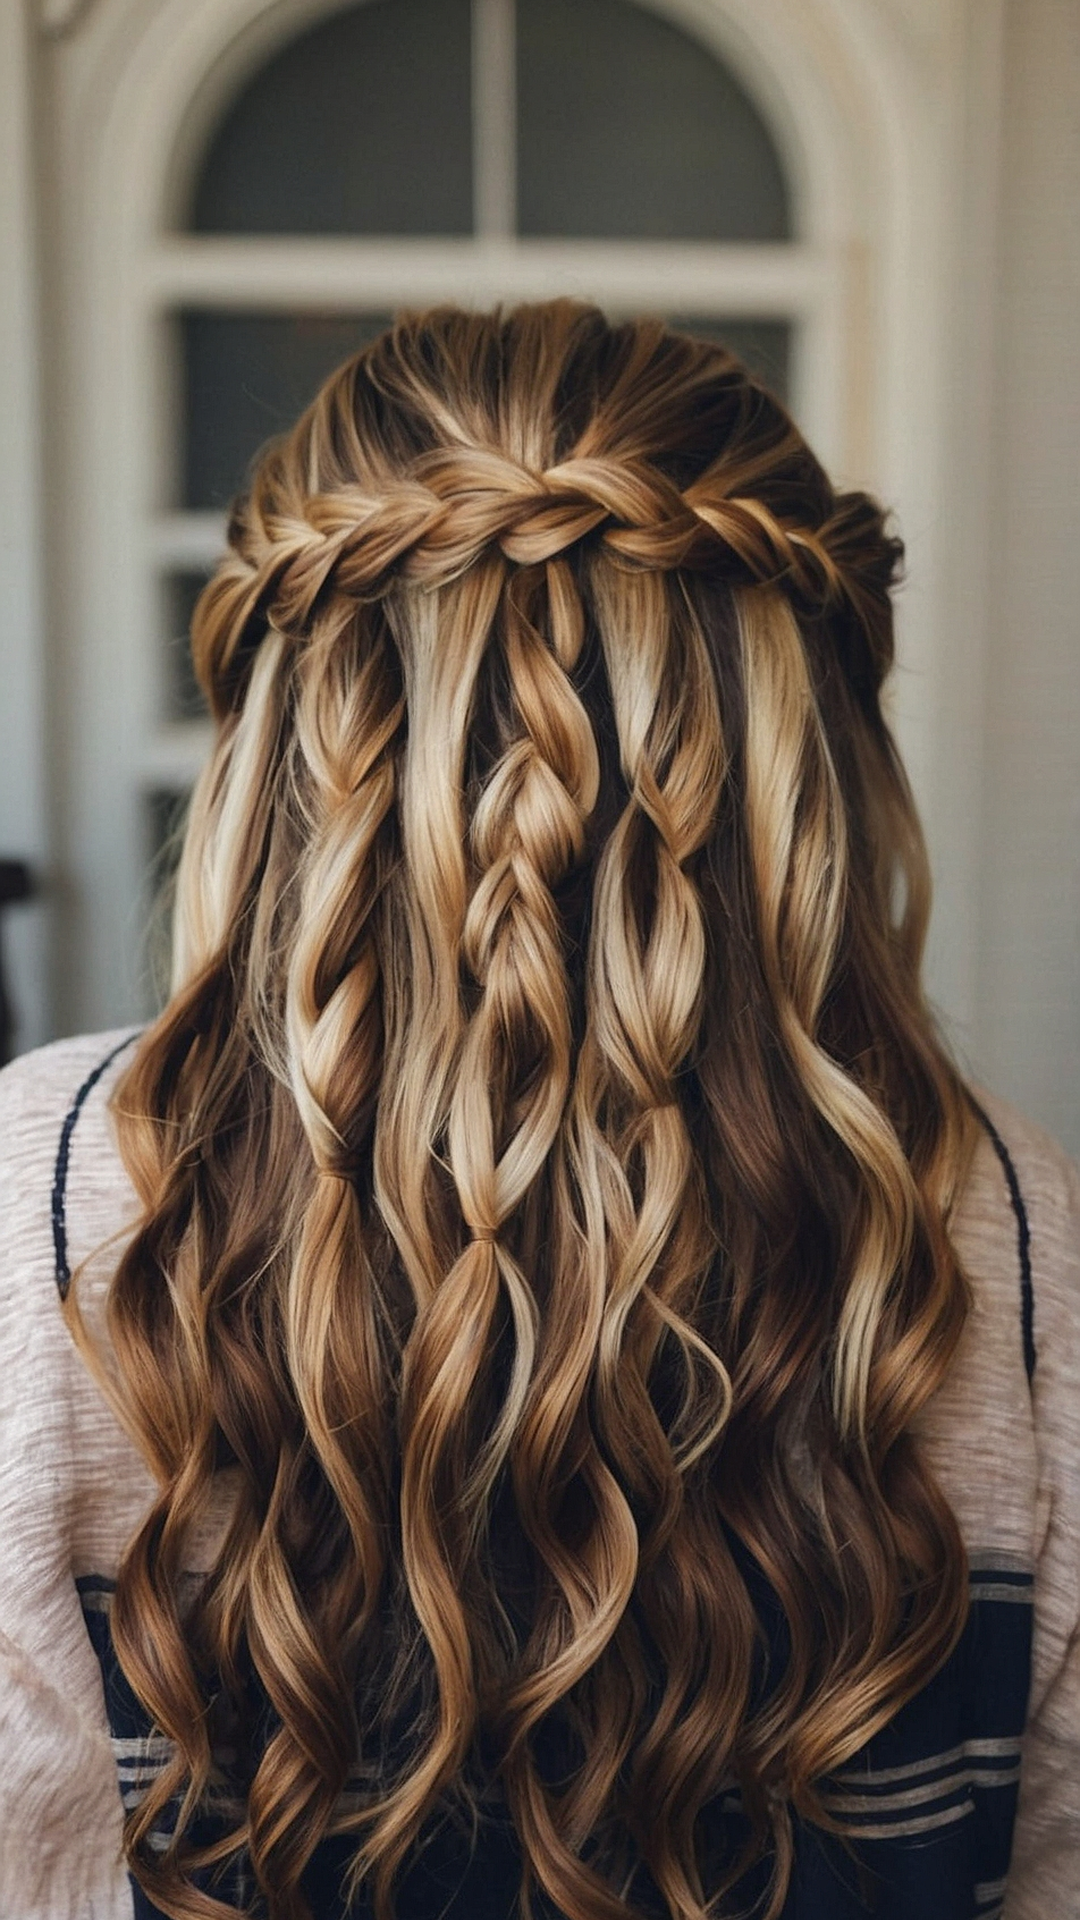 Plait Perfection: Trendy Braided Hairstyles